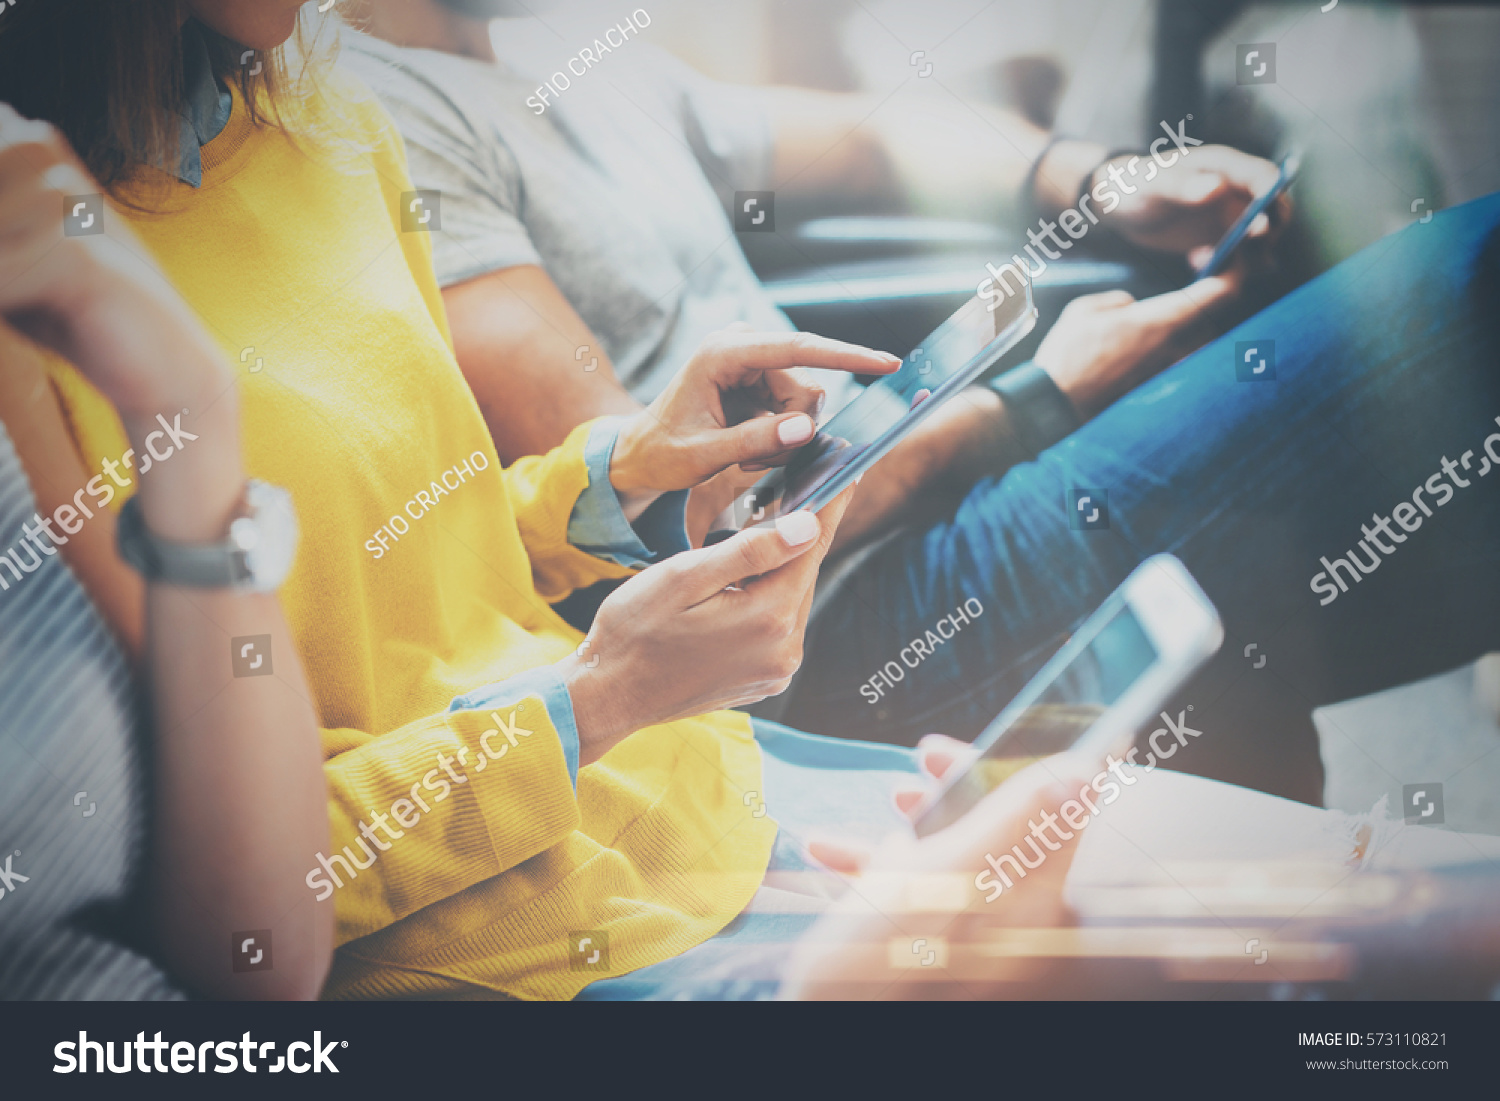 Group of young hipsters sitting on sofa holding en hands and using digital tablet,smartphone.Coworking team concept.Horizontal,blurred background #573110821